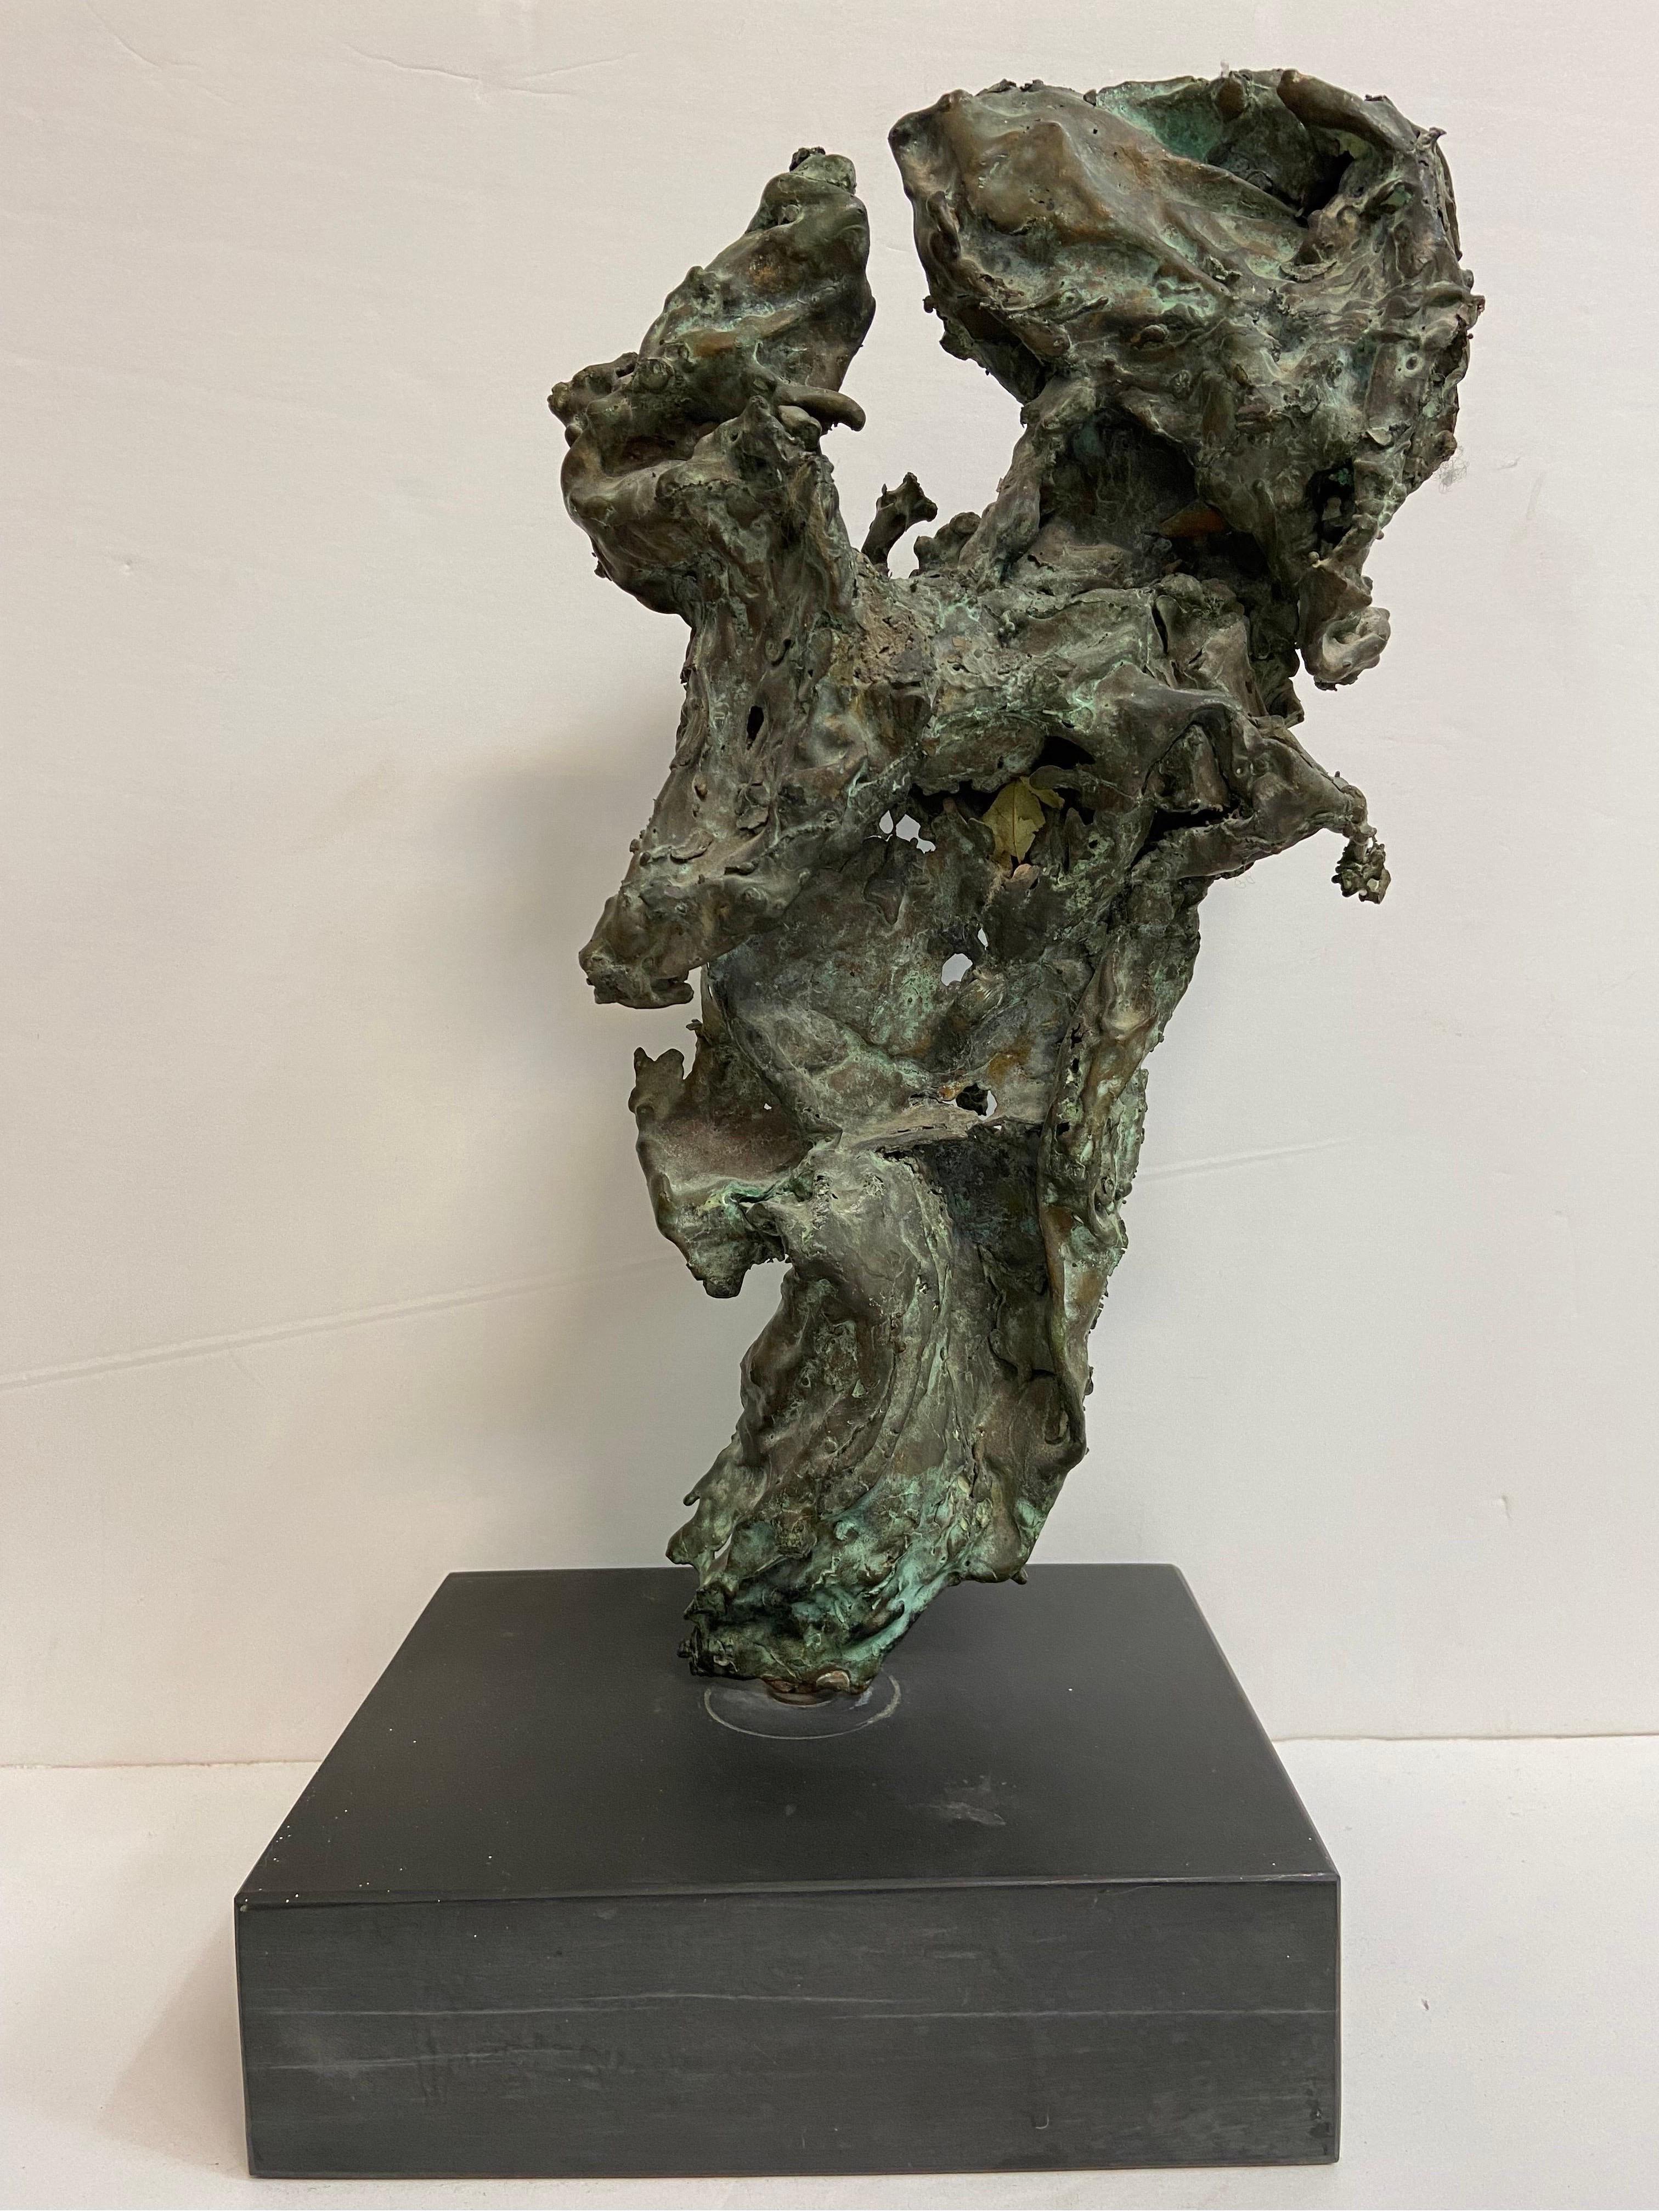 A large and vintage, circa 1960's, verdigris patina brutalist style large bronze sculpture on a base. The sculpture evokes a sense of movement and freedom, captured in a moment of time. The base itself measures approximately 9